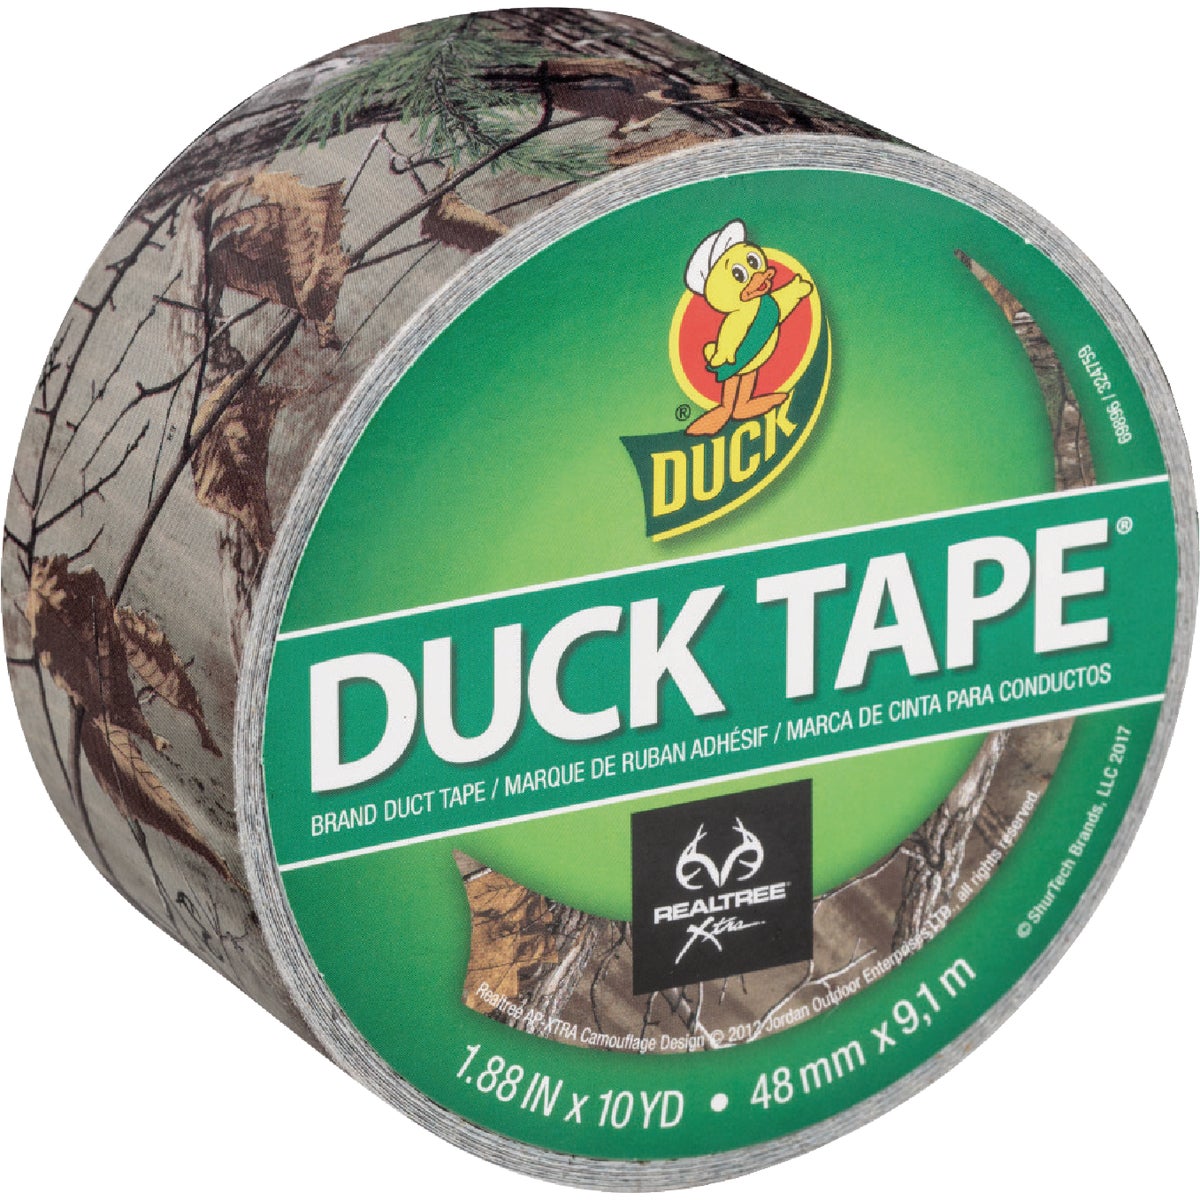 Item 400825, Duck Tape camouflage prints are created with warm, natural colors and a 3D 